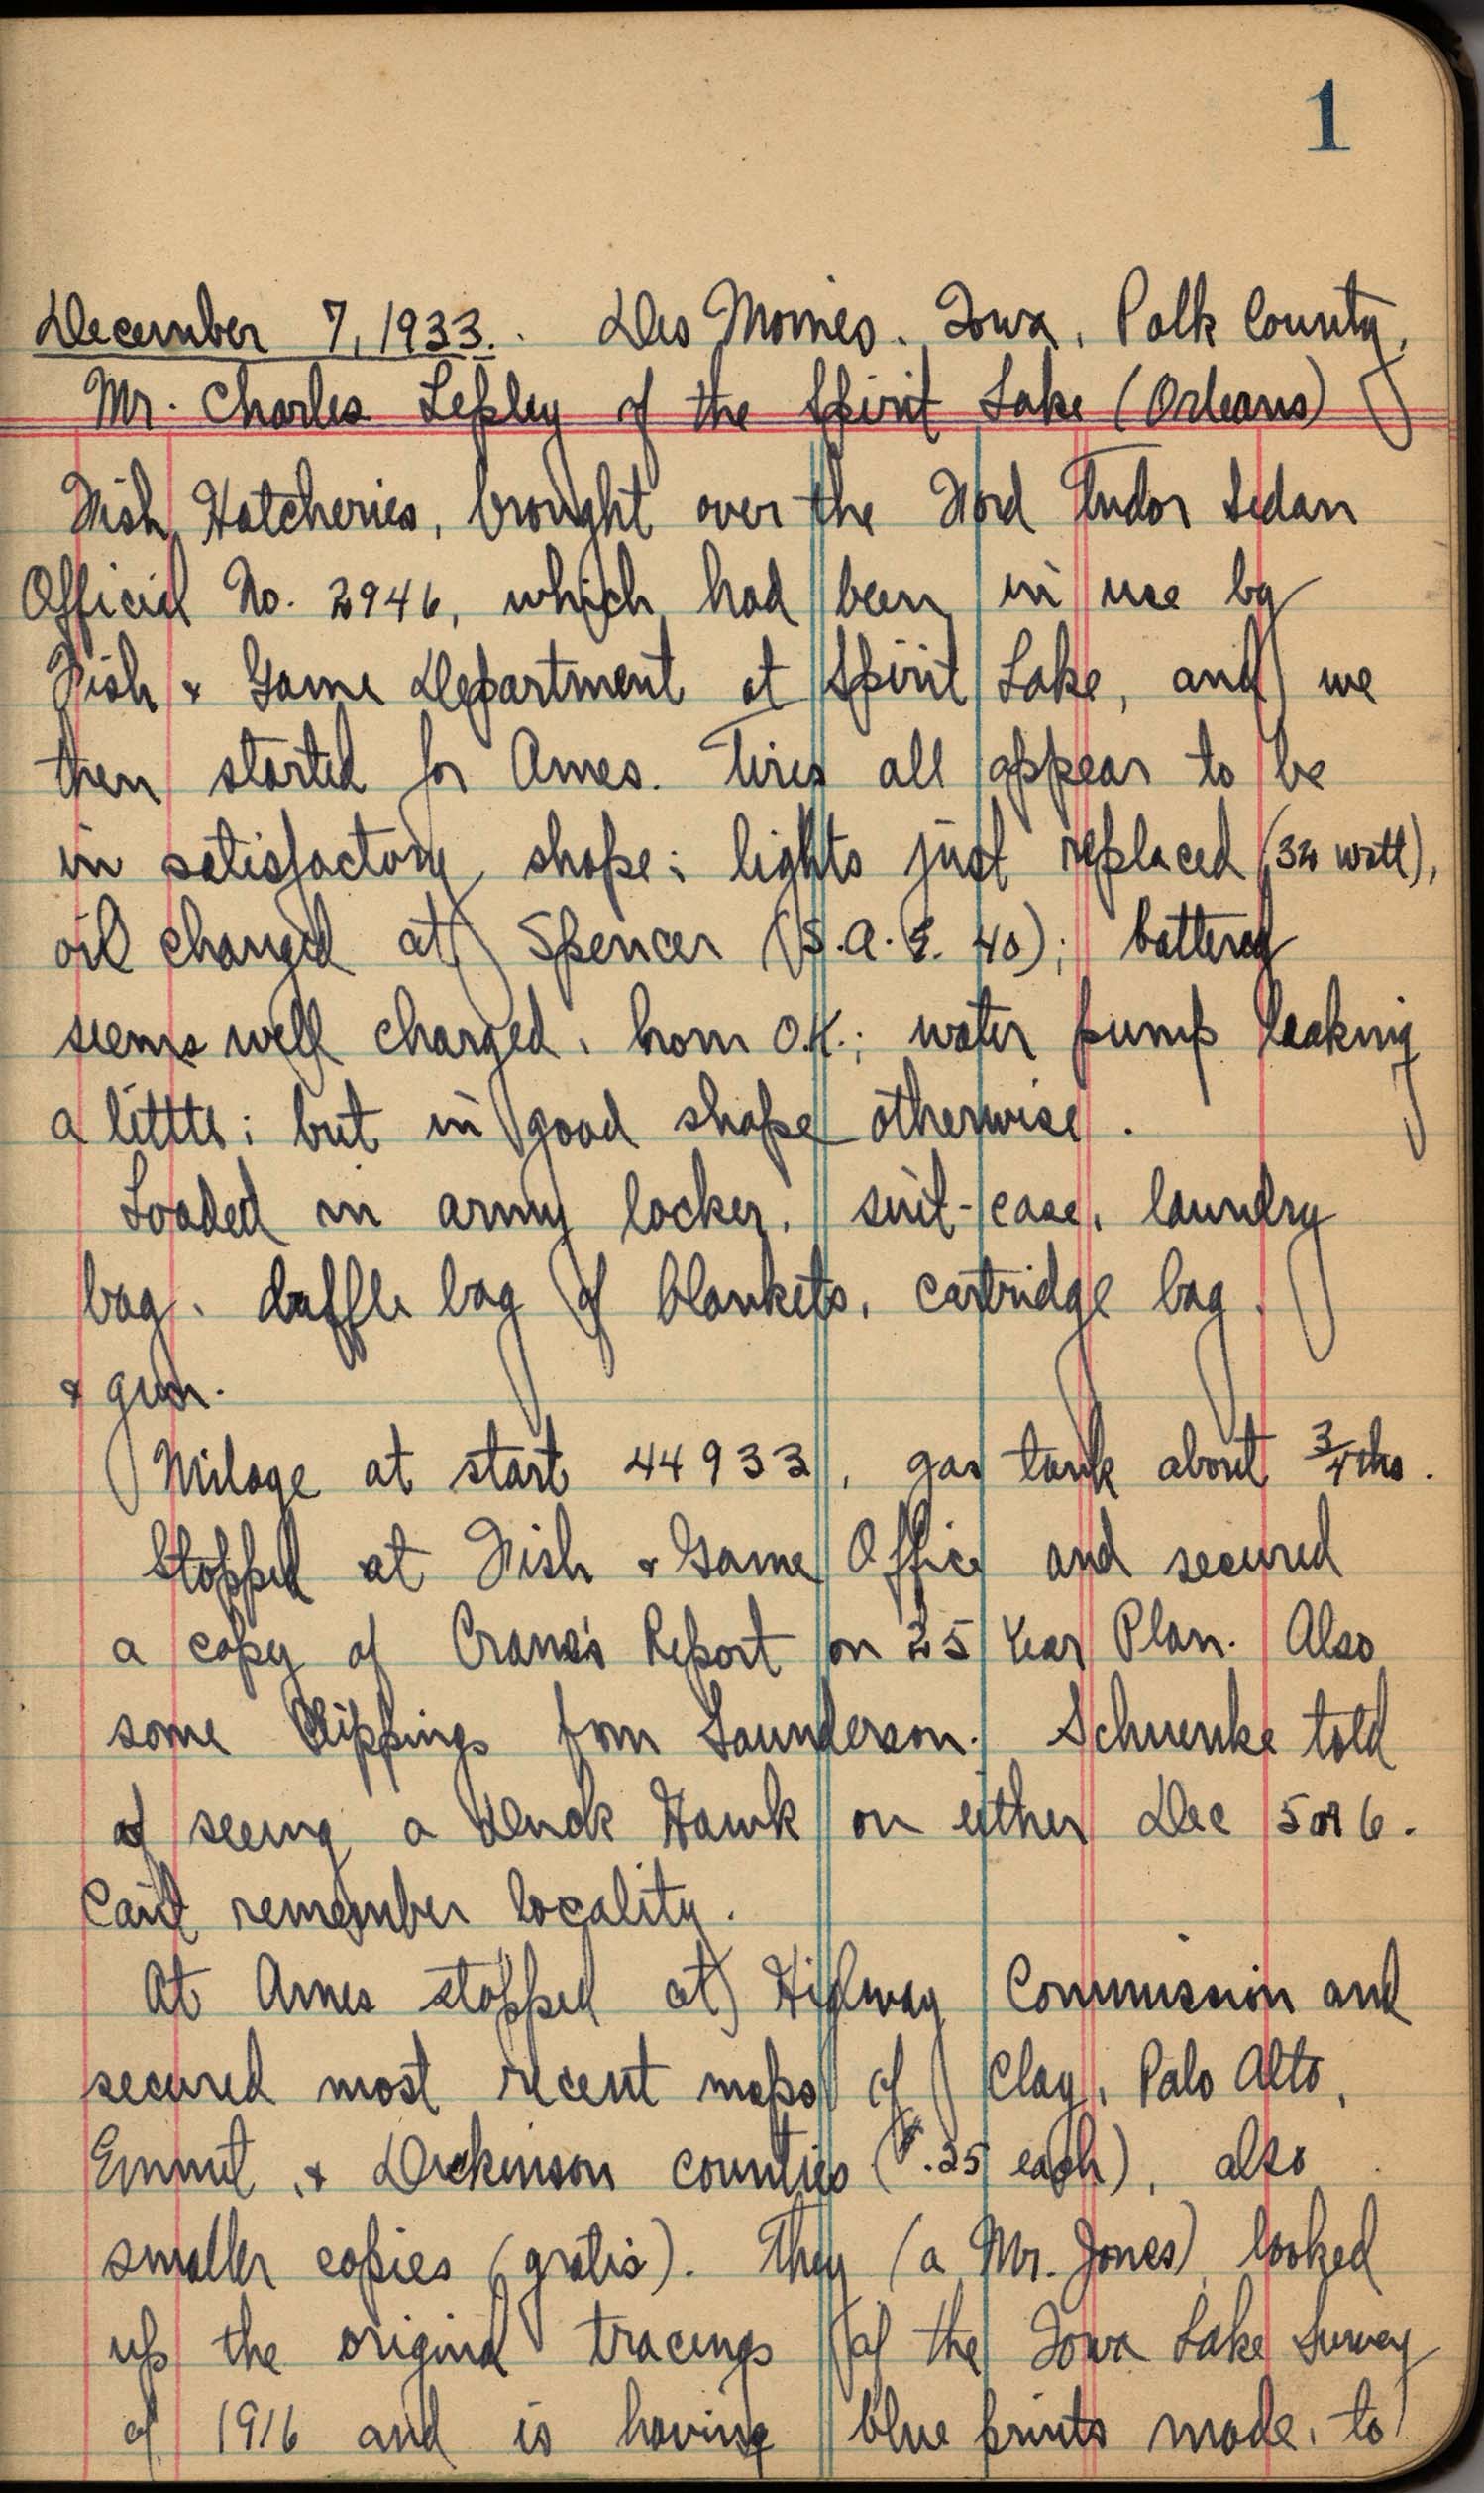 The Journal of Philip DuMont, December 7, 1933 to April 11, 1934